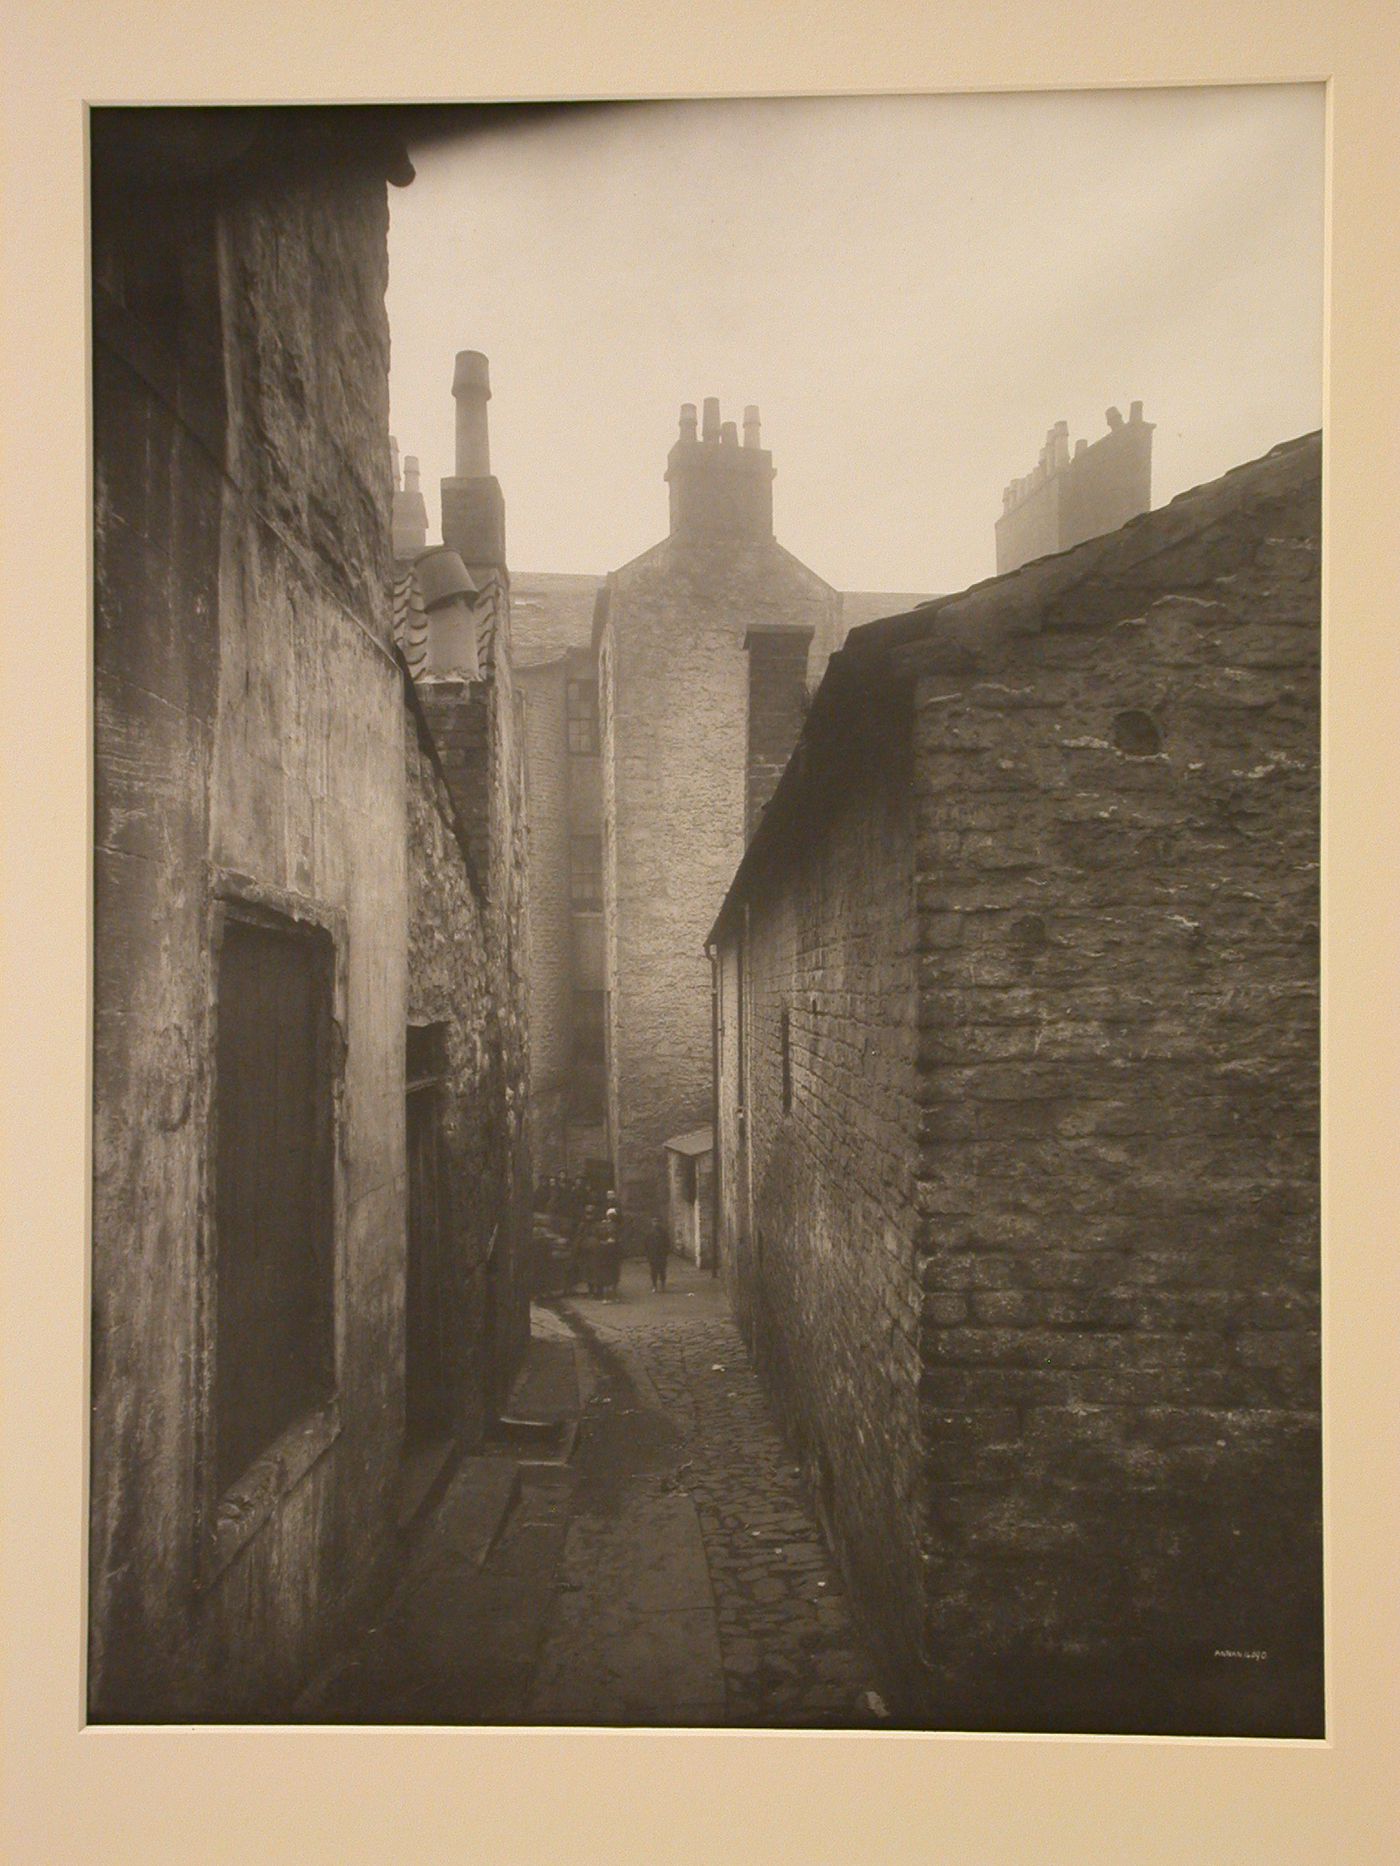 View of a narrow alley with a crowd of children standing at the end, Glasgow, Scotland